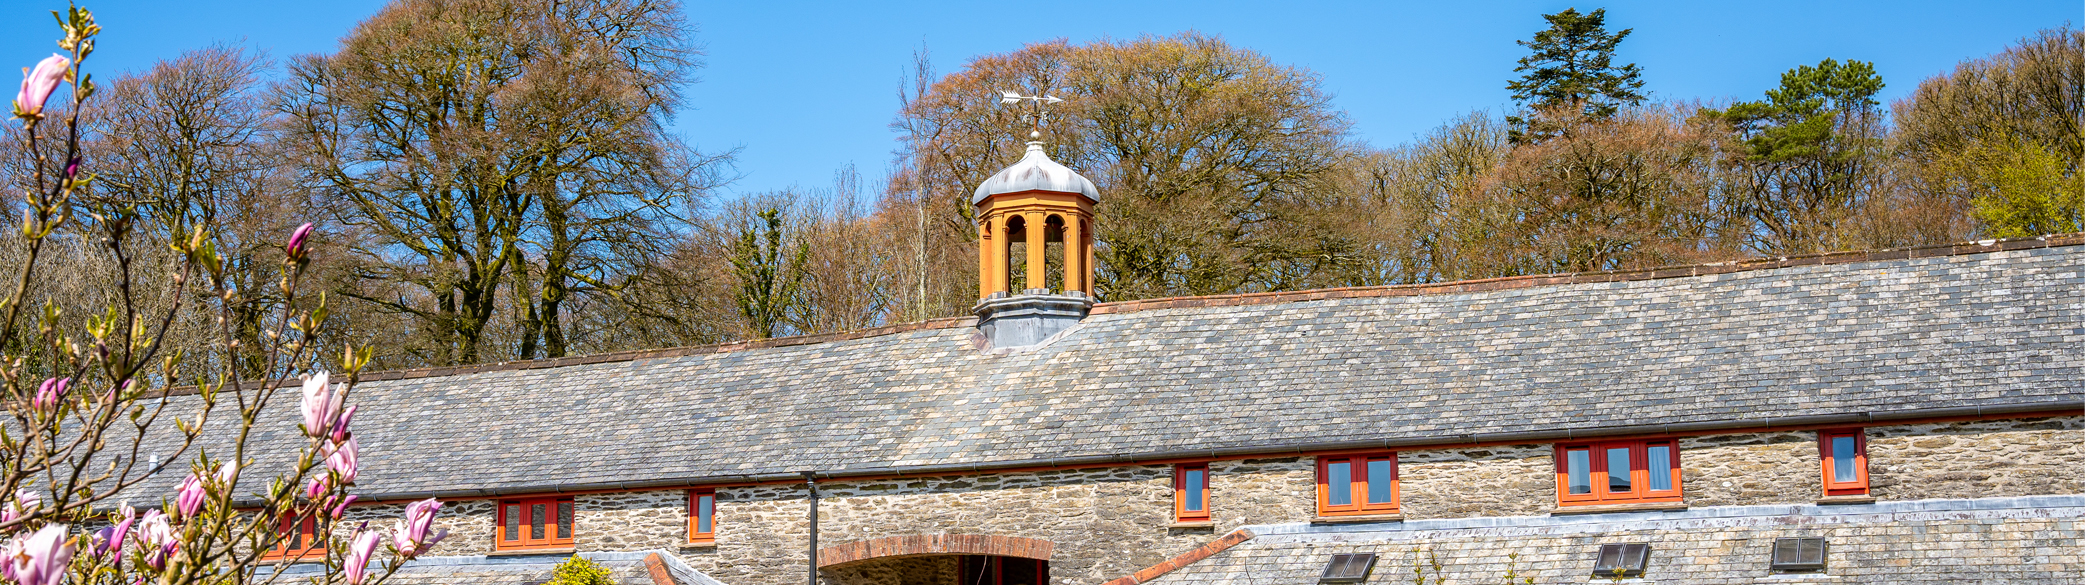 A wide-angled photograph of the long stone building of Calvert Exmoor accommodation, with a belltower atop the roof. The windows are all red-framed and there is a blooming magnolia tree in the bottom left of the photograph.